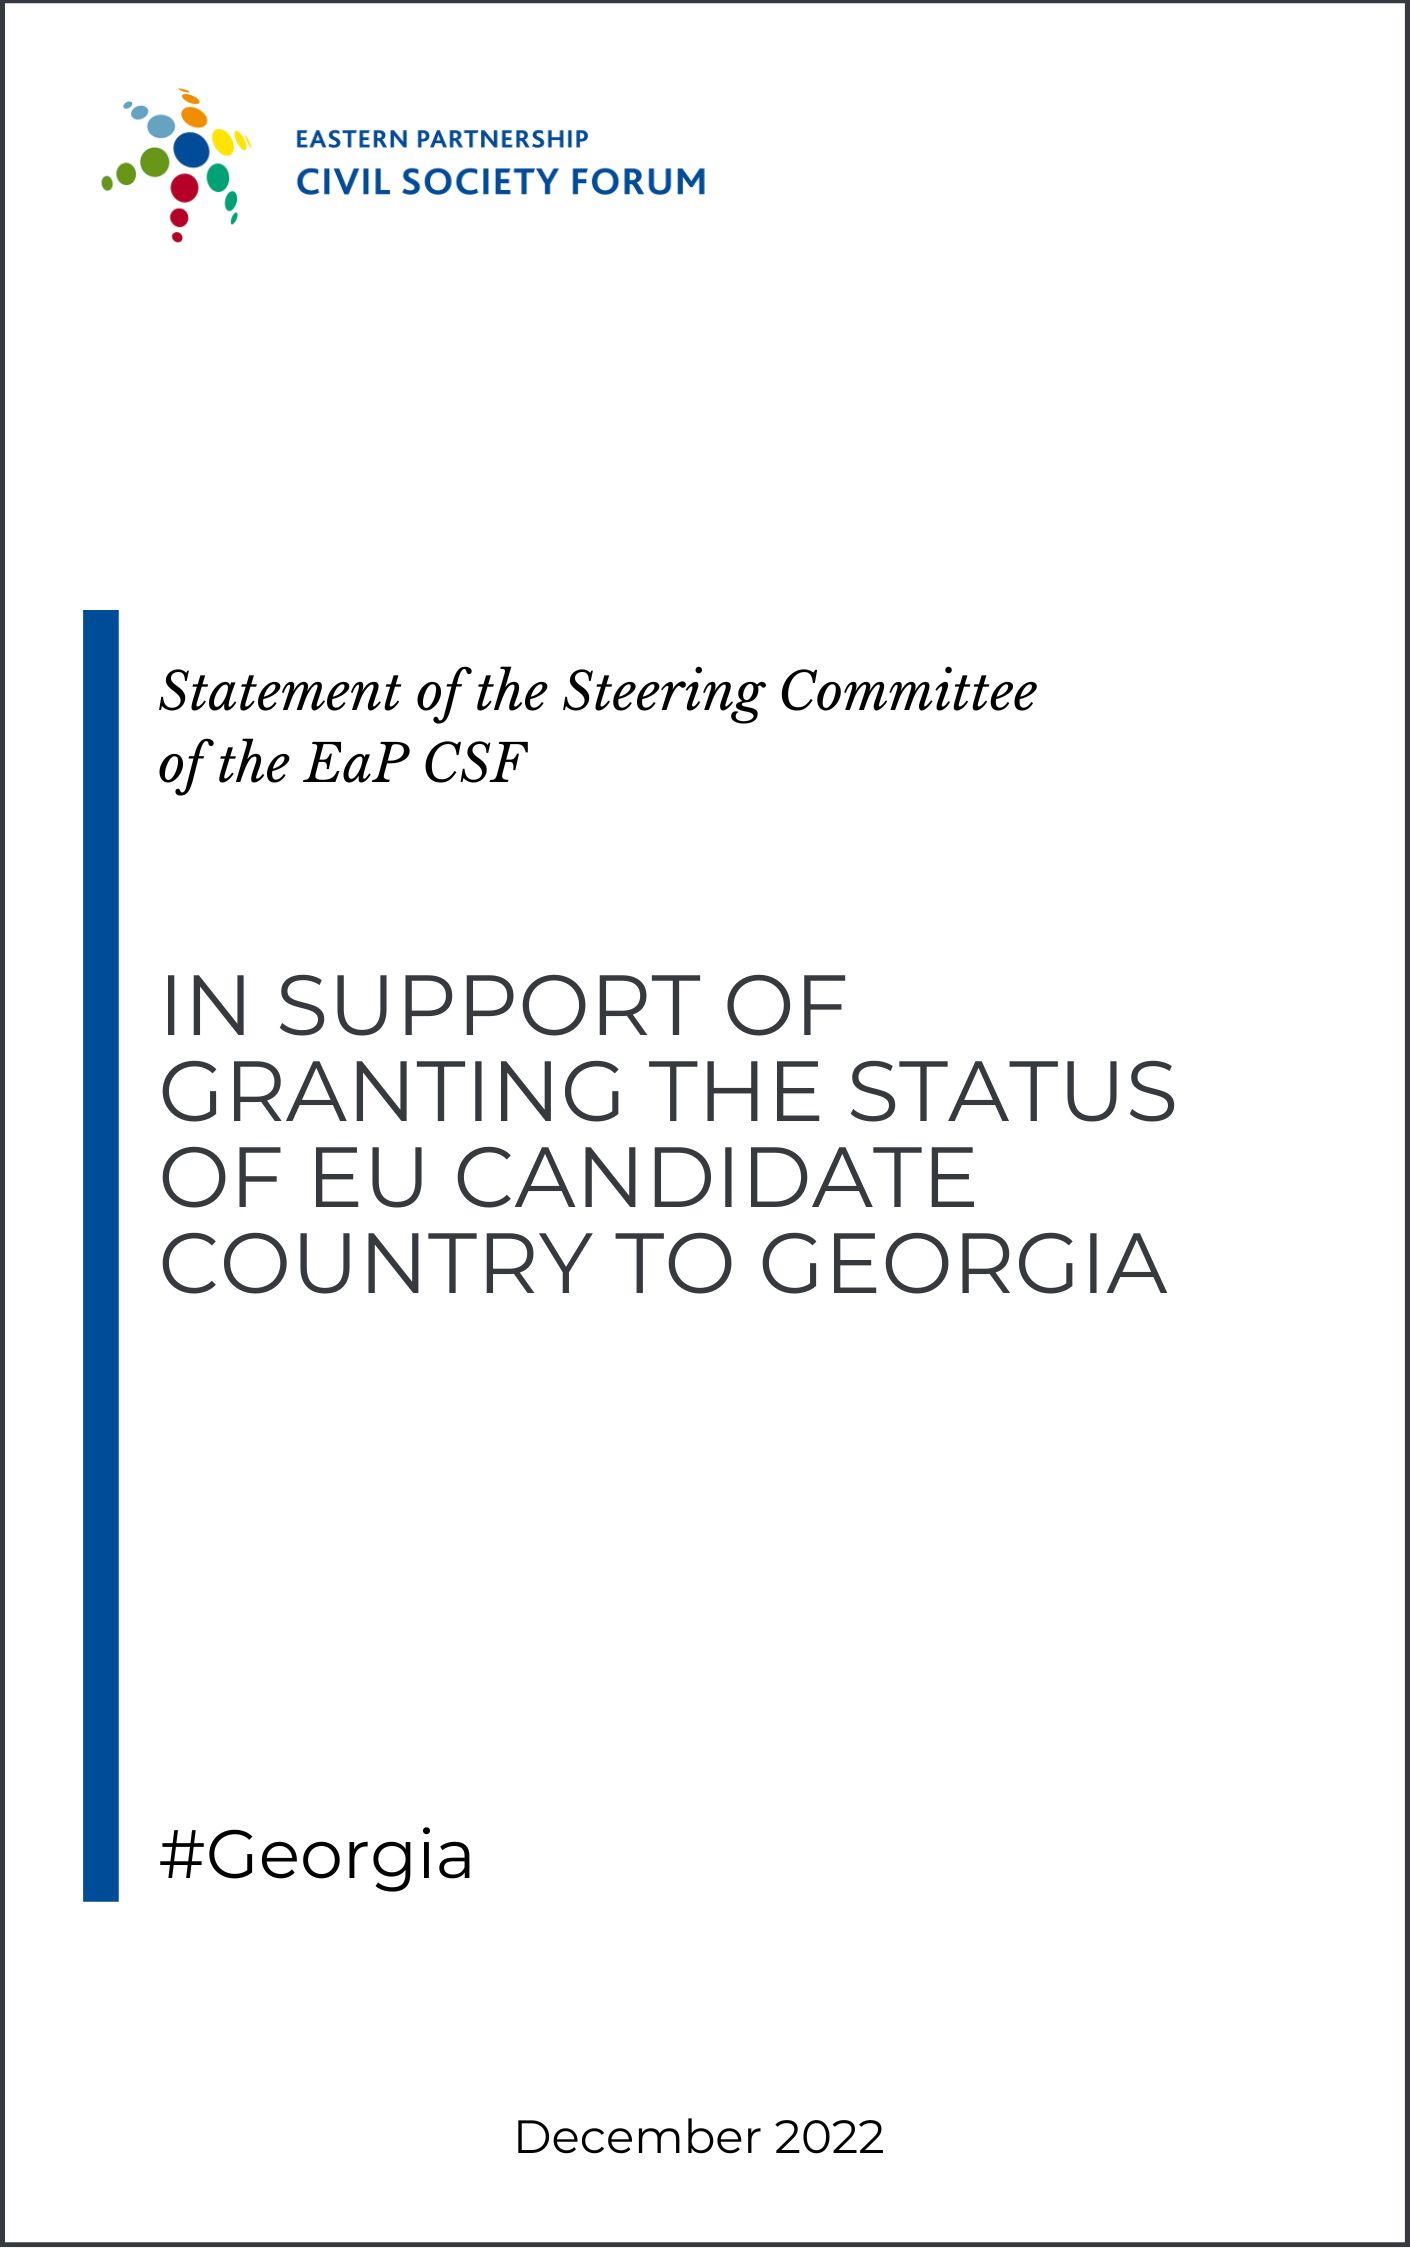 Statement of the Steering Committee of the Eastern Partnership Civil Society Forum in support of granting the Status of EU Candidate Country to Georgia